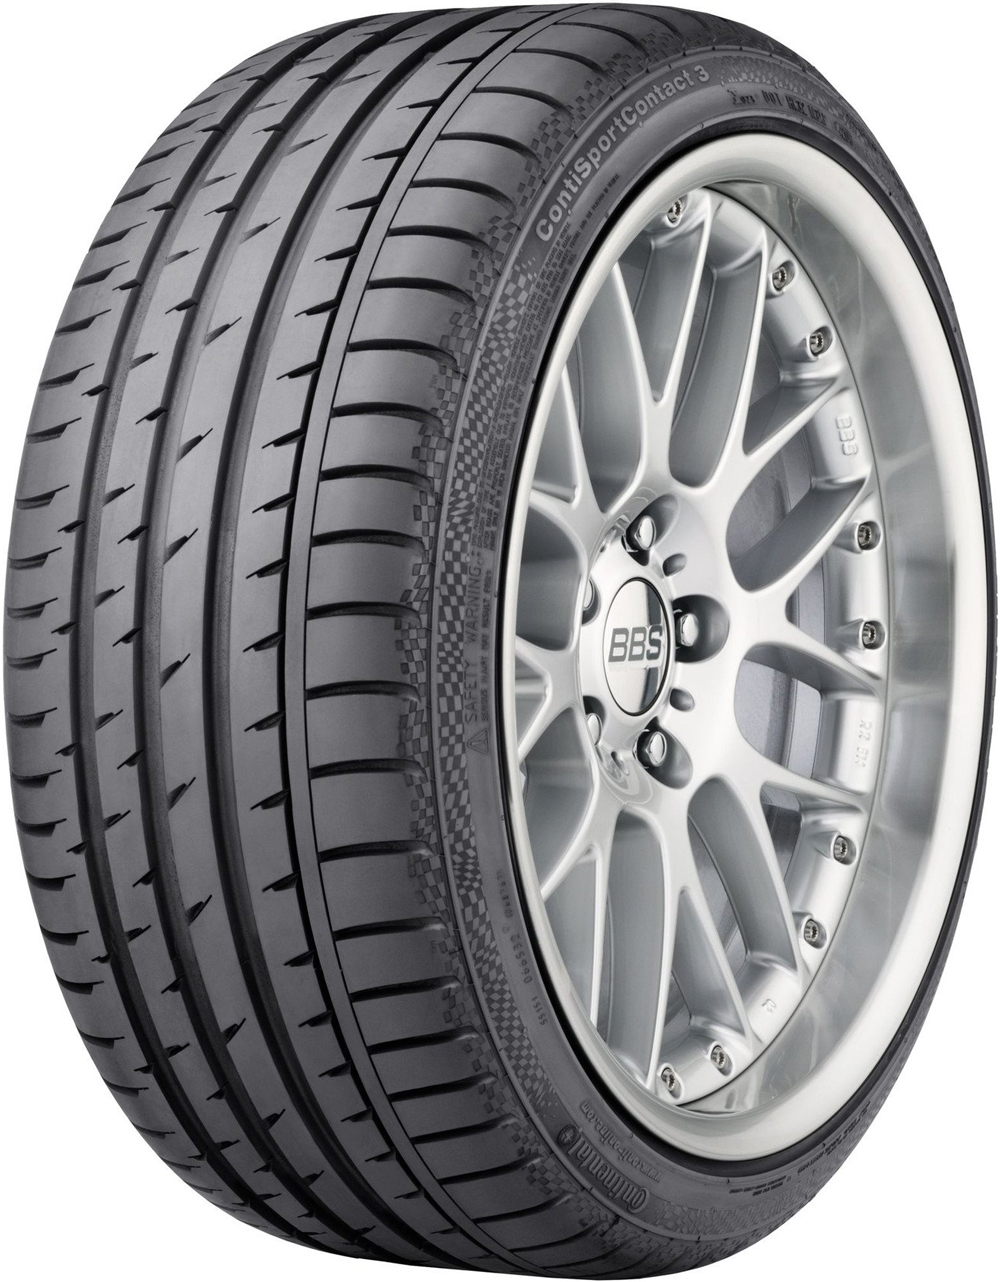 Гуми за кола CONTINENTAL Conti Sport Contact 3 RFT BMW FP 275/40 R19 101